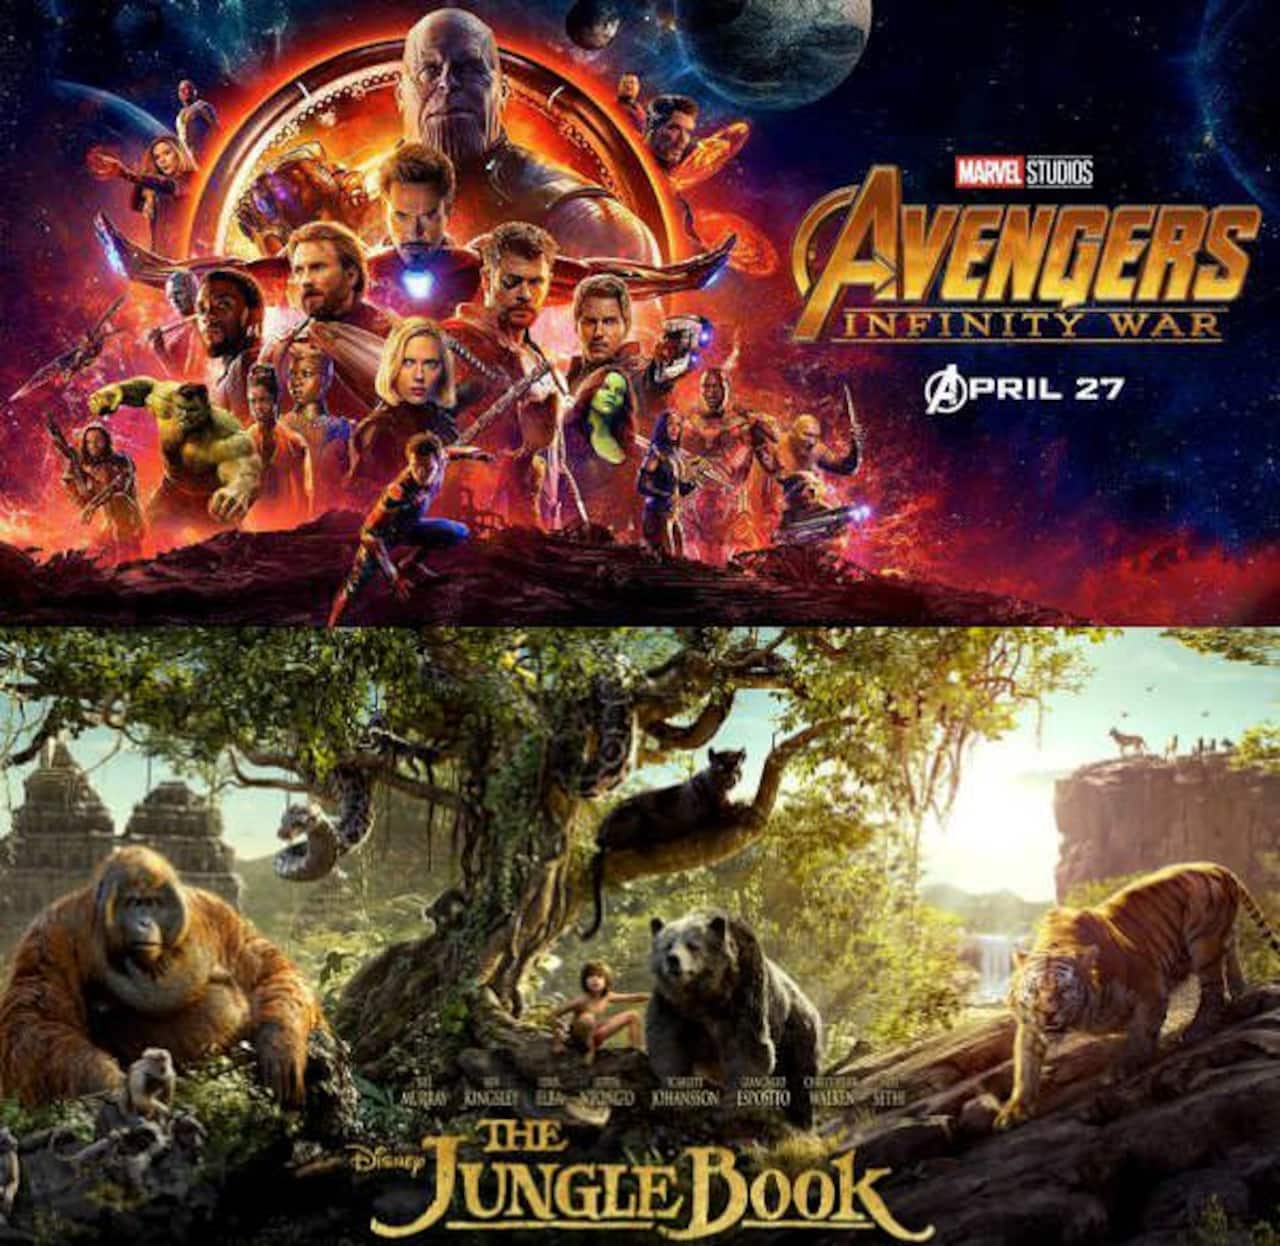 Avengers Infinity War box office prediction: The Marvel film will crush The  Jungle Book to become the highest Hollywood grosser in India - Bollywood  News & Gossip, Movie Reviews, Trailers & Videos